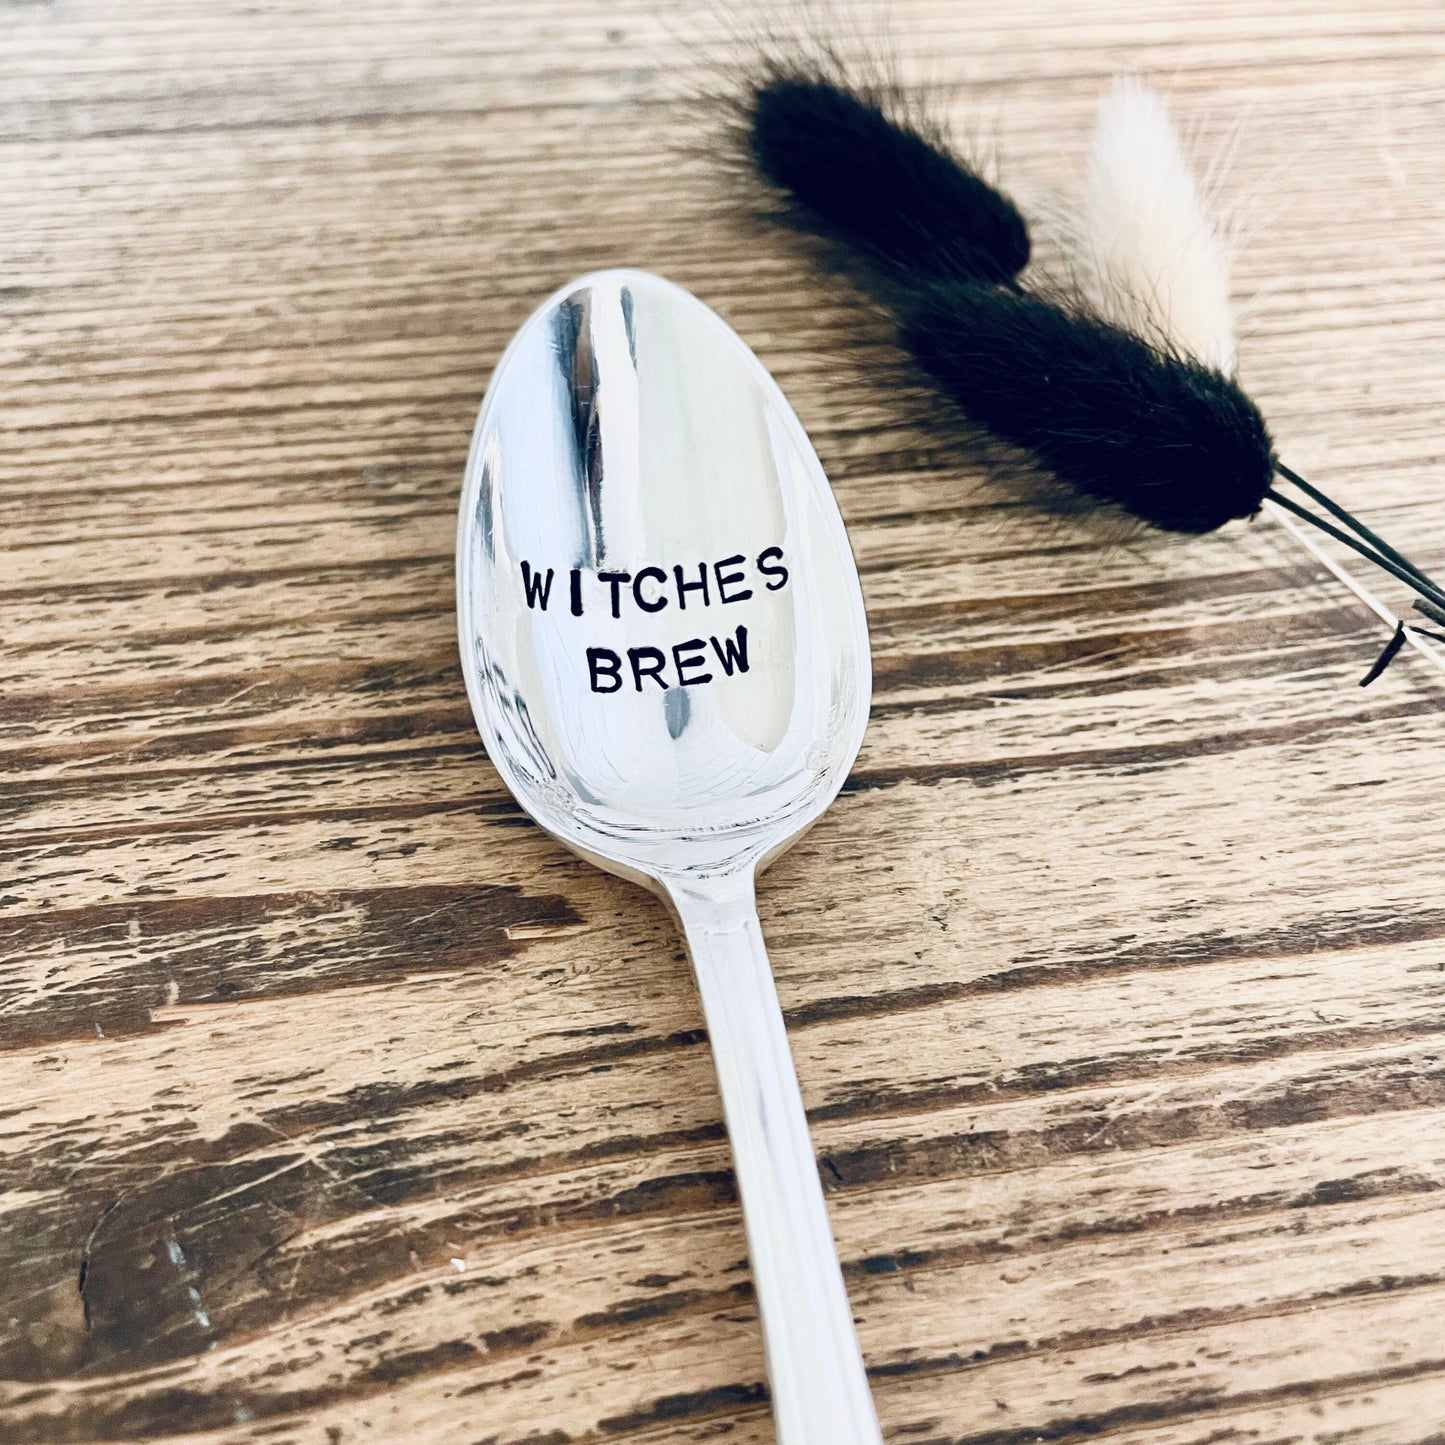 Witches Brew - Stamped spoon - Vintage spoon - Coffee lover- Tea lover - SOZO Silver